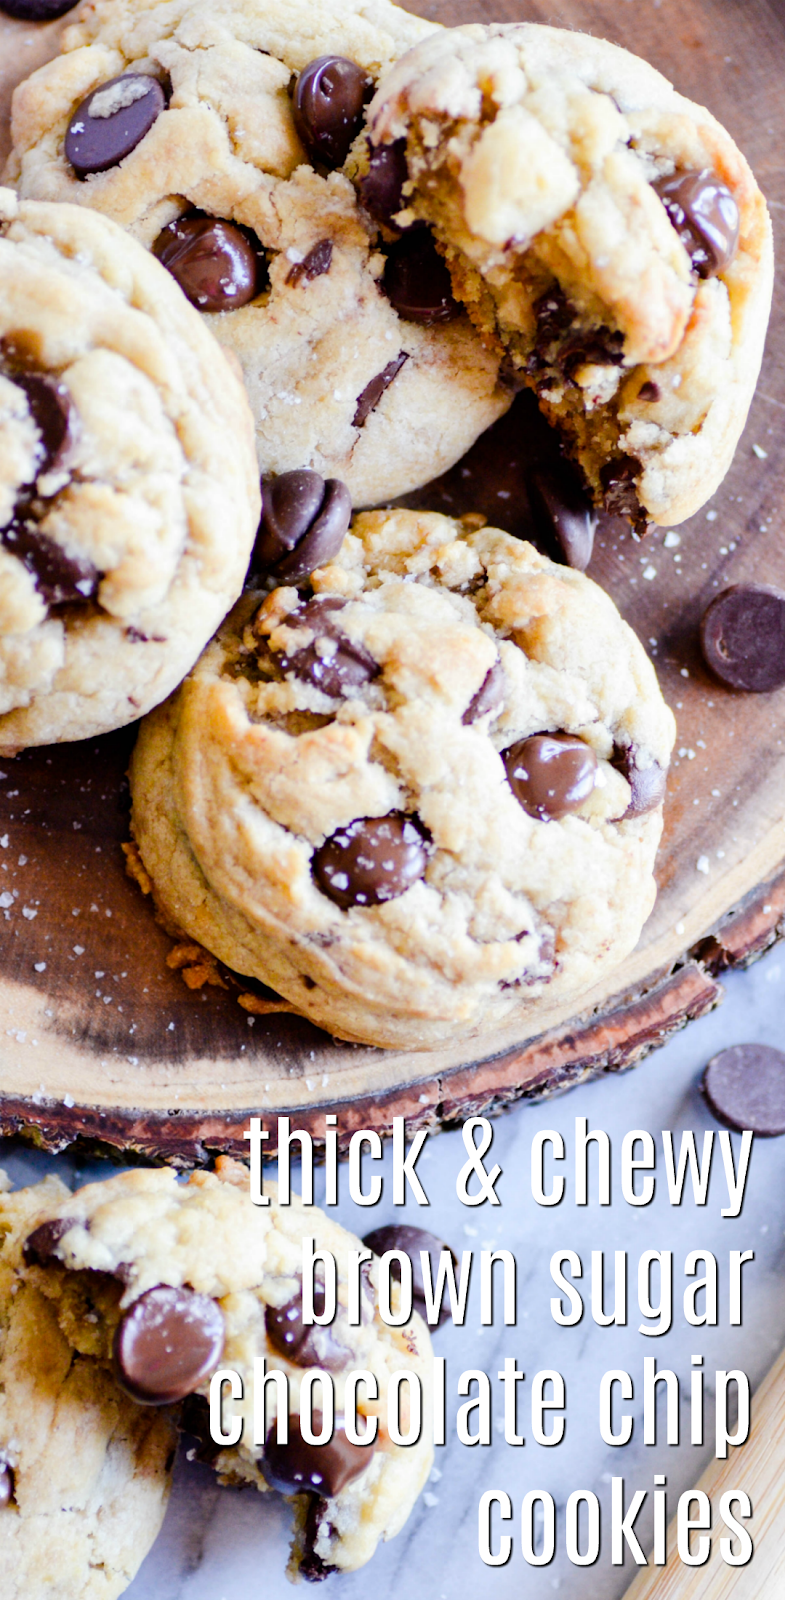 If you're a fan of THICK chocolate chip cookies, this recipe is for you!